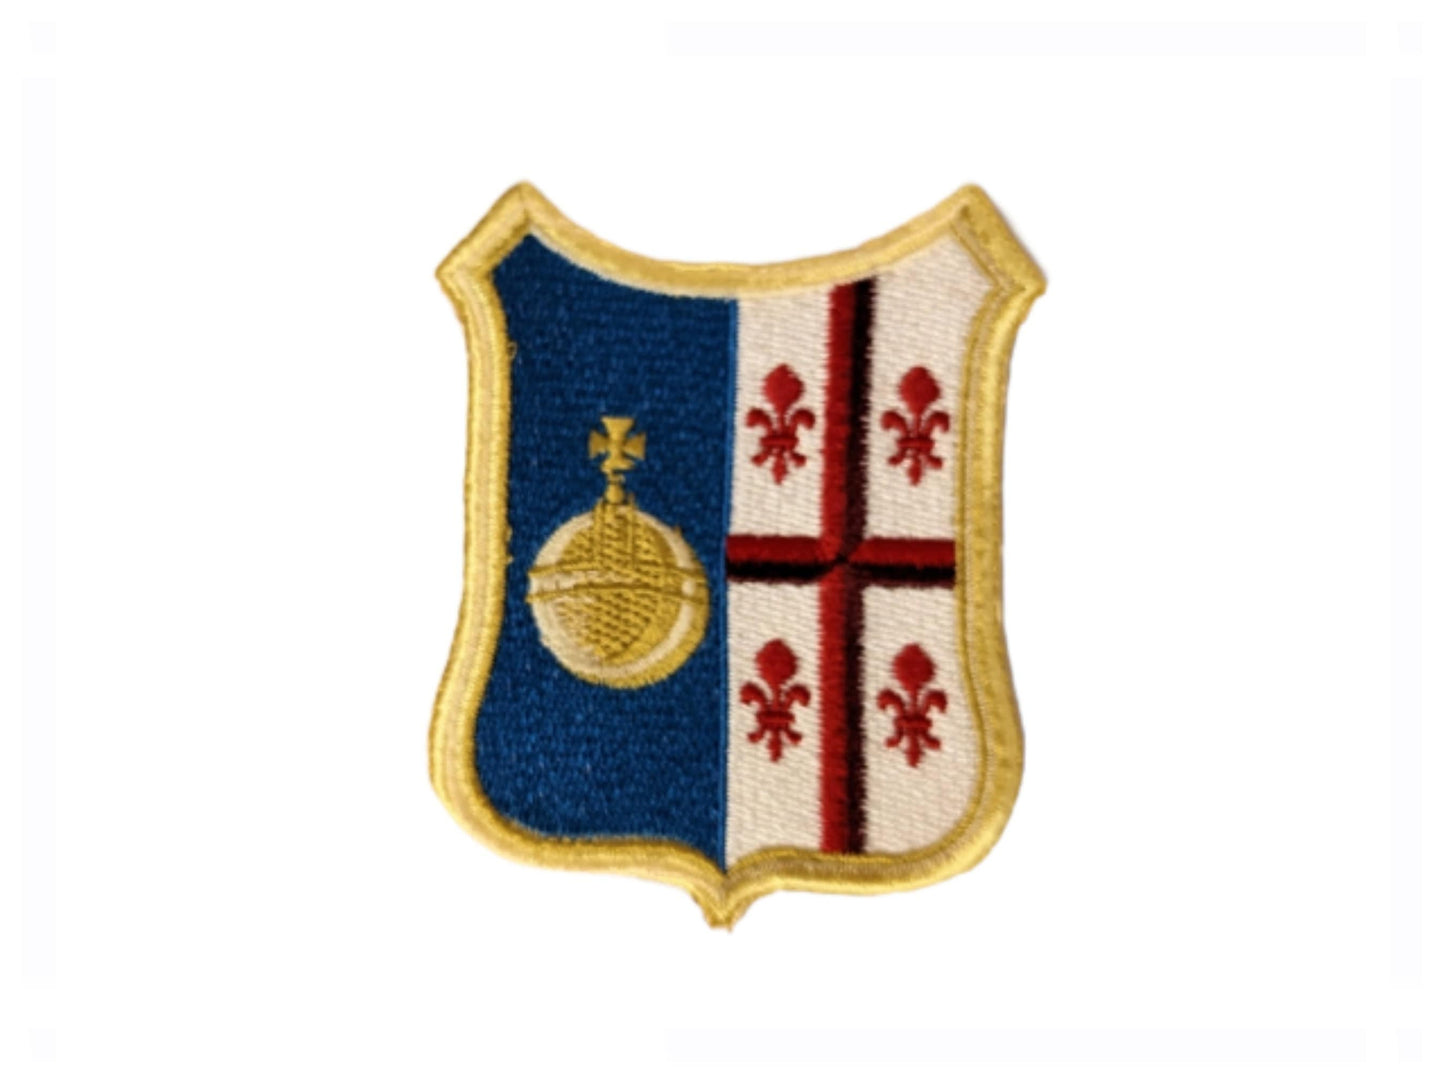 Institute of Christ the King Sovereign Priest, Iron on patch, Sew on Badge, ICKSP, Badge for Fascia belt